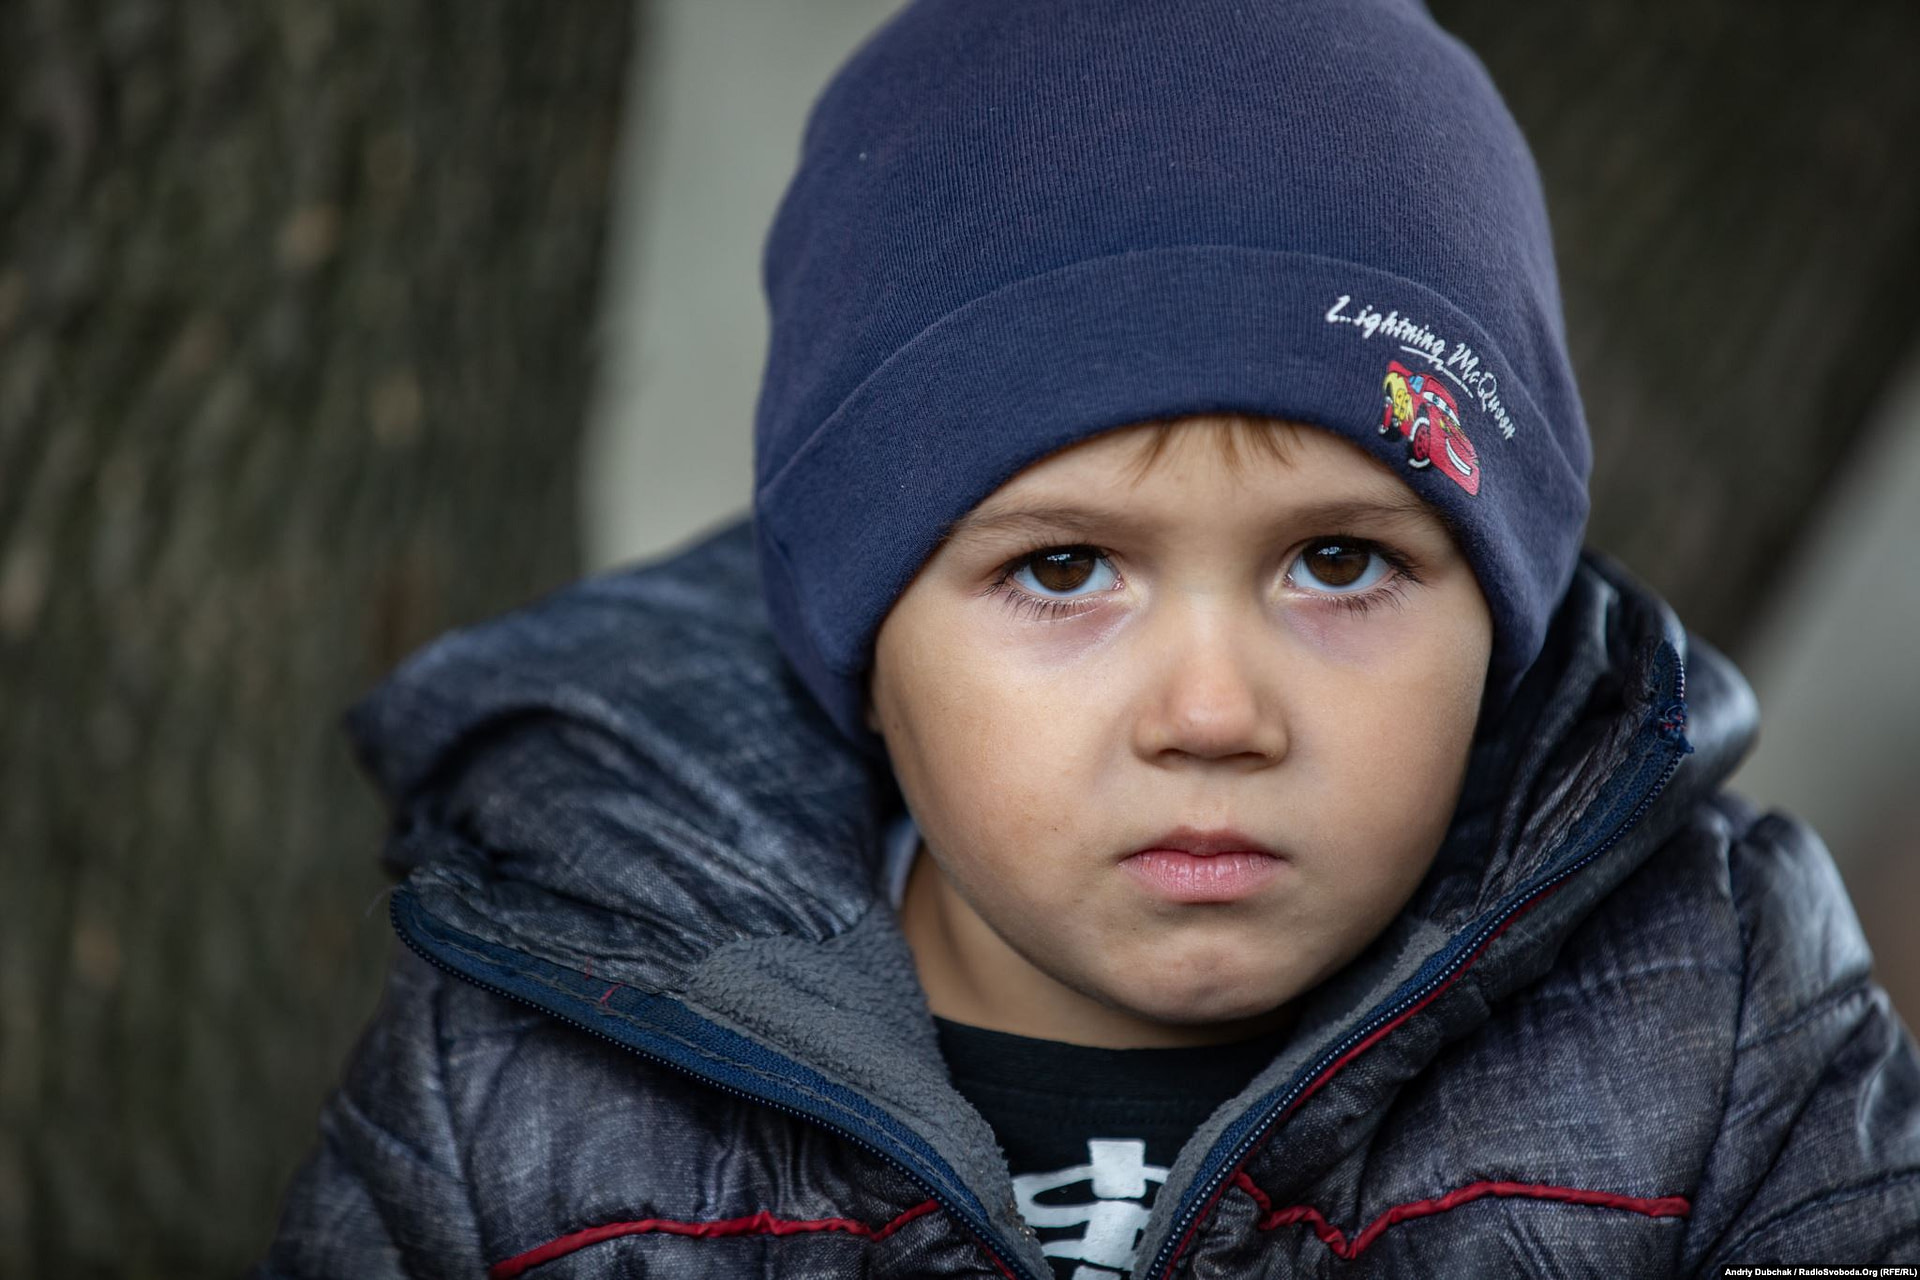 Four-year-old Zhora lives in Zolote. The village is located near the front line in eastern Ukraine and could soon be inside a newly negotiated demilitarized zone. (photo: ANdriy Dubchak)